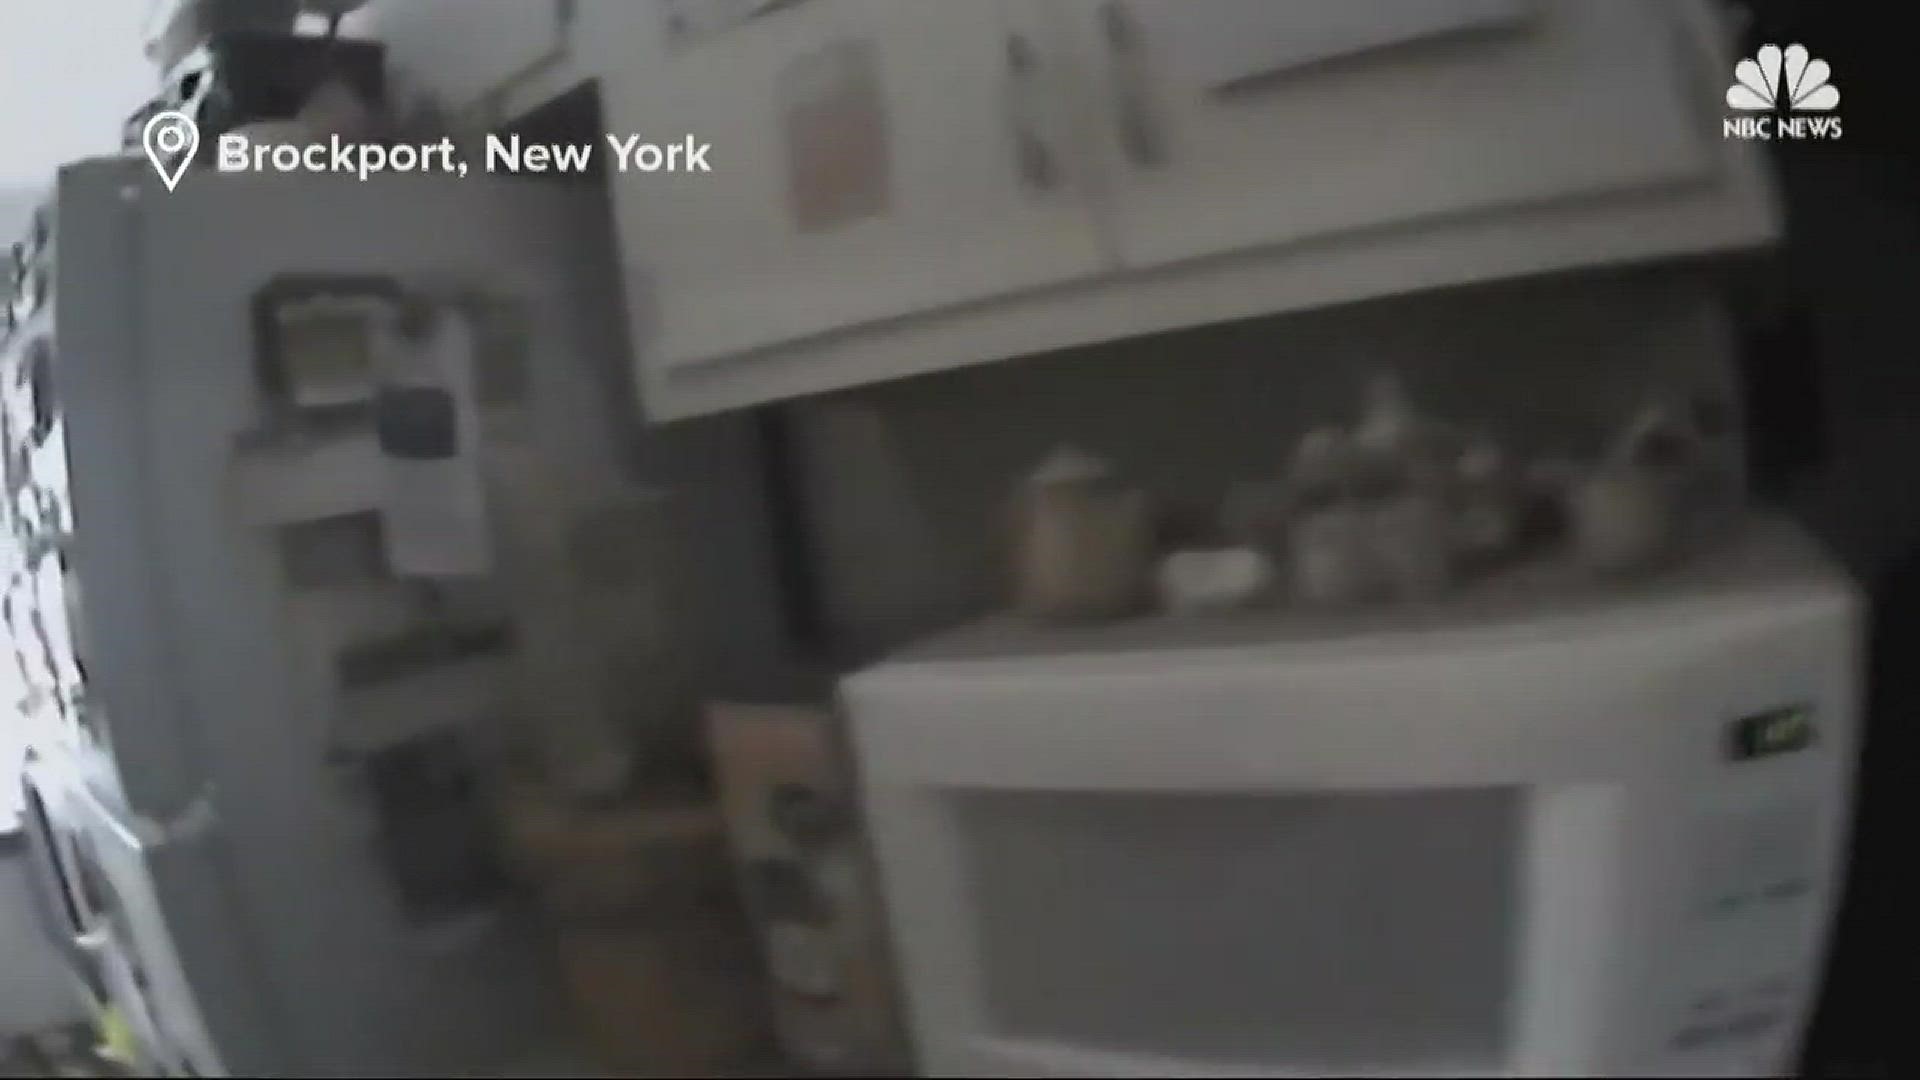 An officer's body camera video shows a squirrel lunging at the officer after it broke into a home in upstate New York and started eating some cookies.